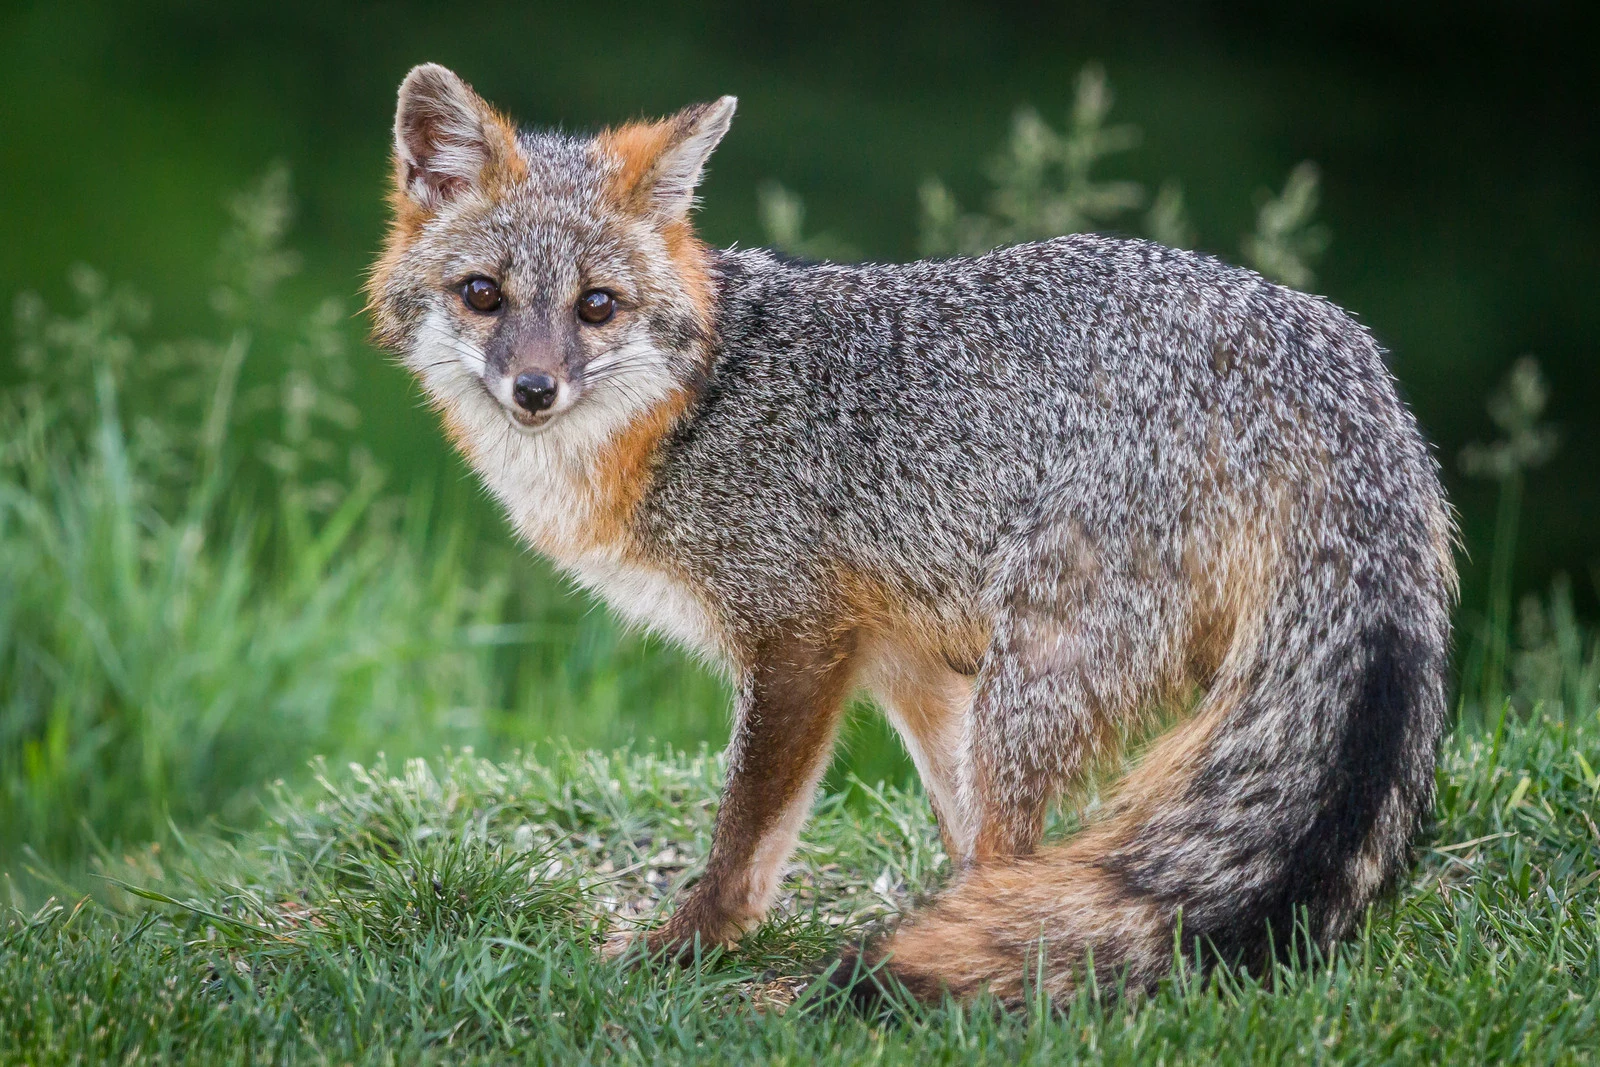 Don't Be Alarmed if You See Foxes in Your Neighborhood